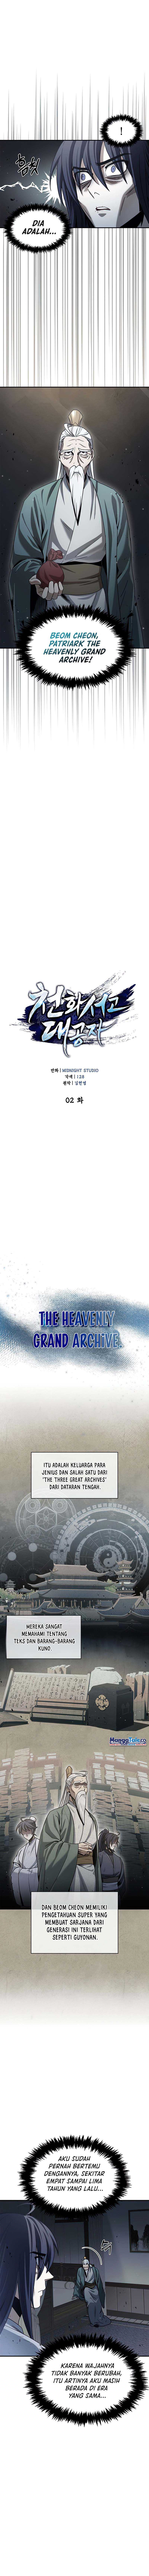 Heavenly Grand Archive’s Young Master Chapter 2